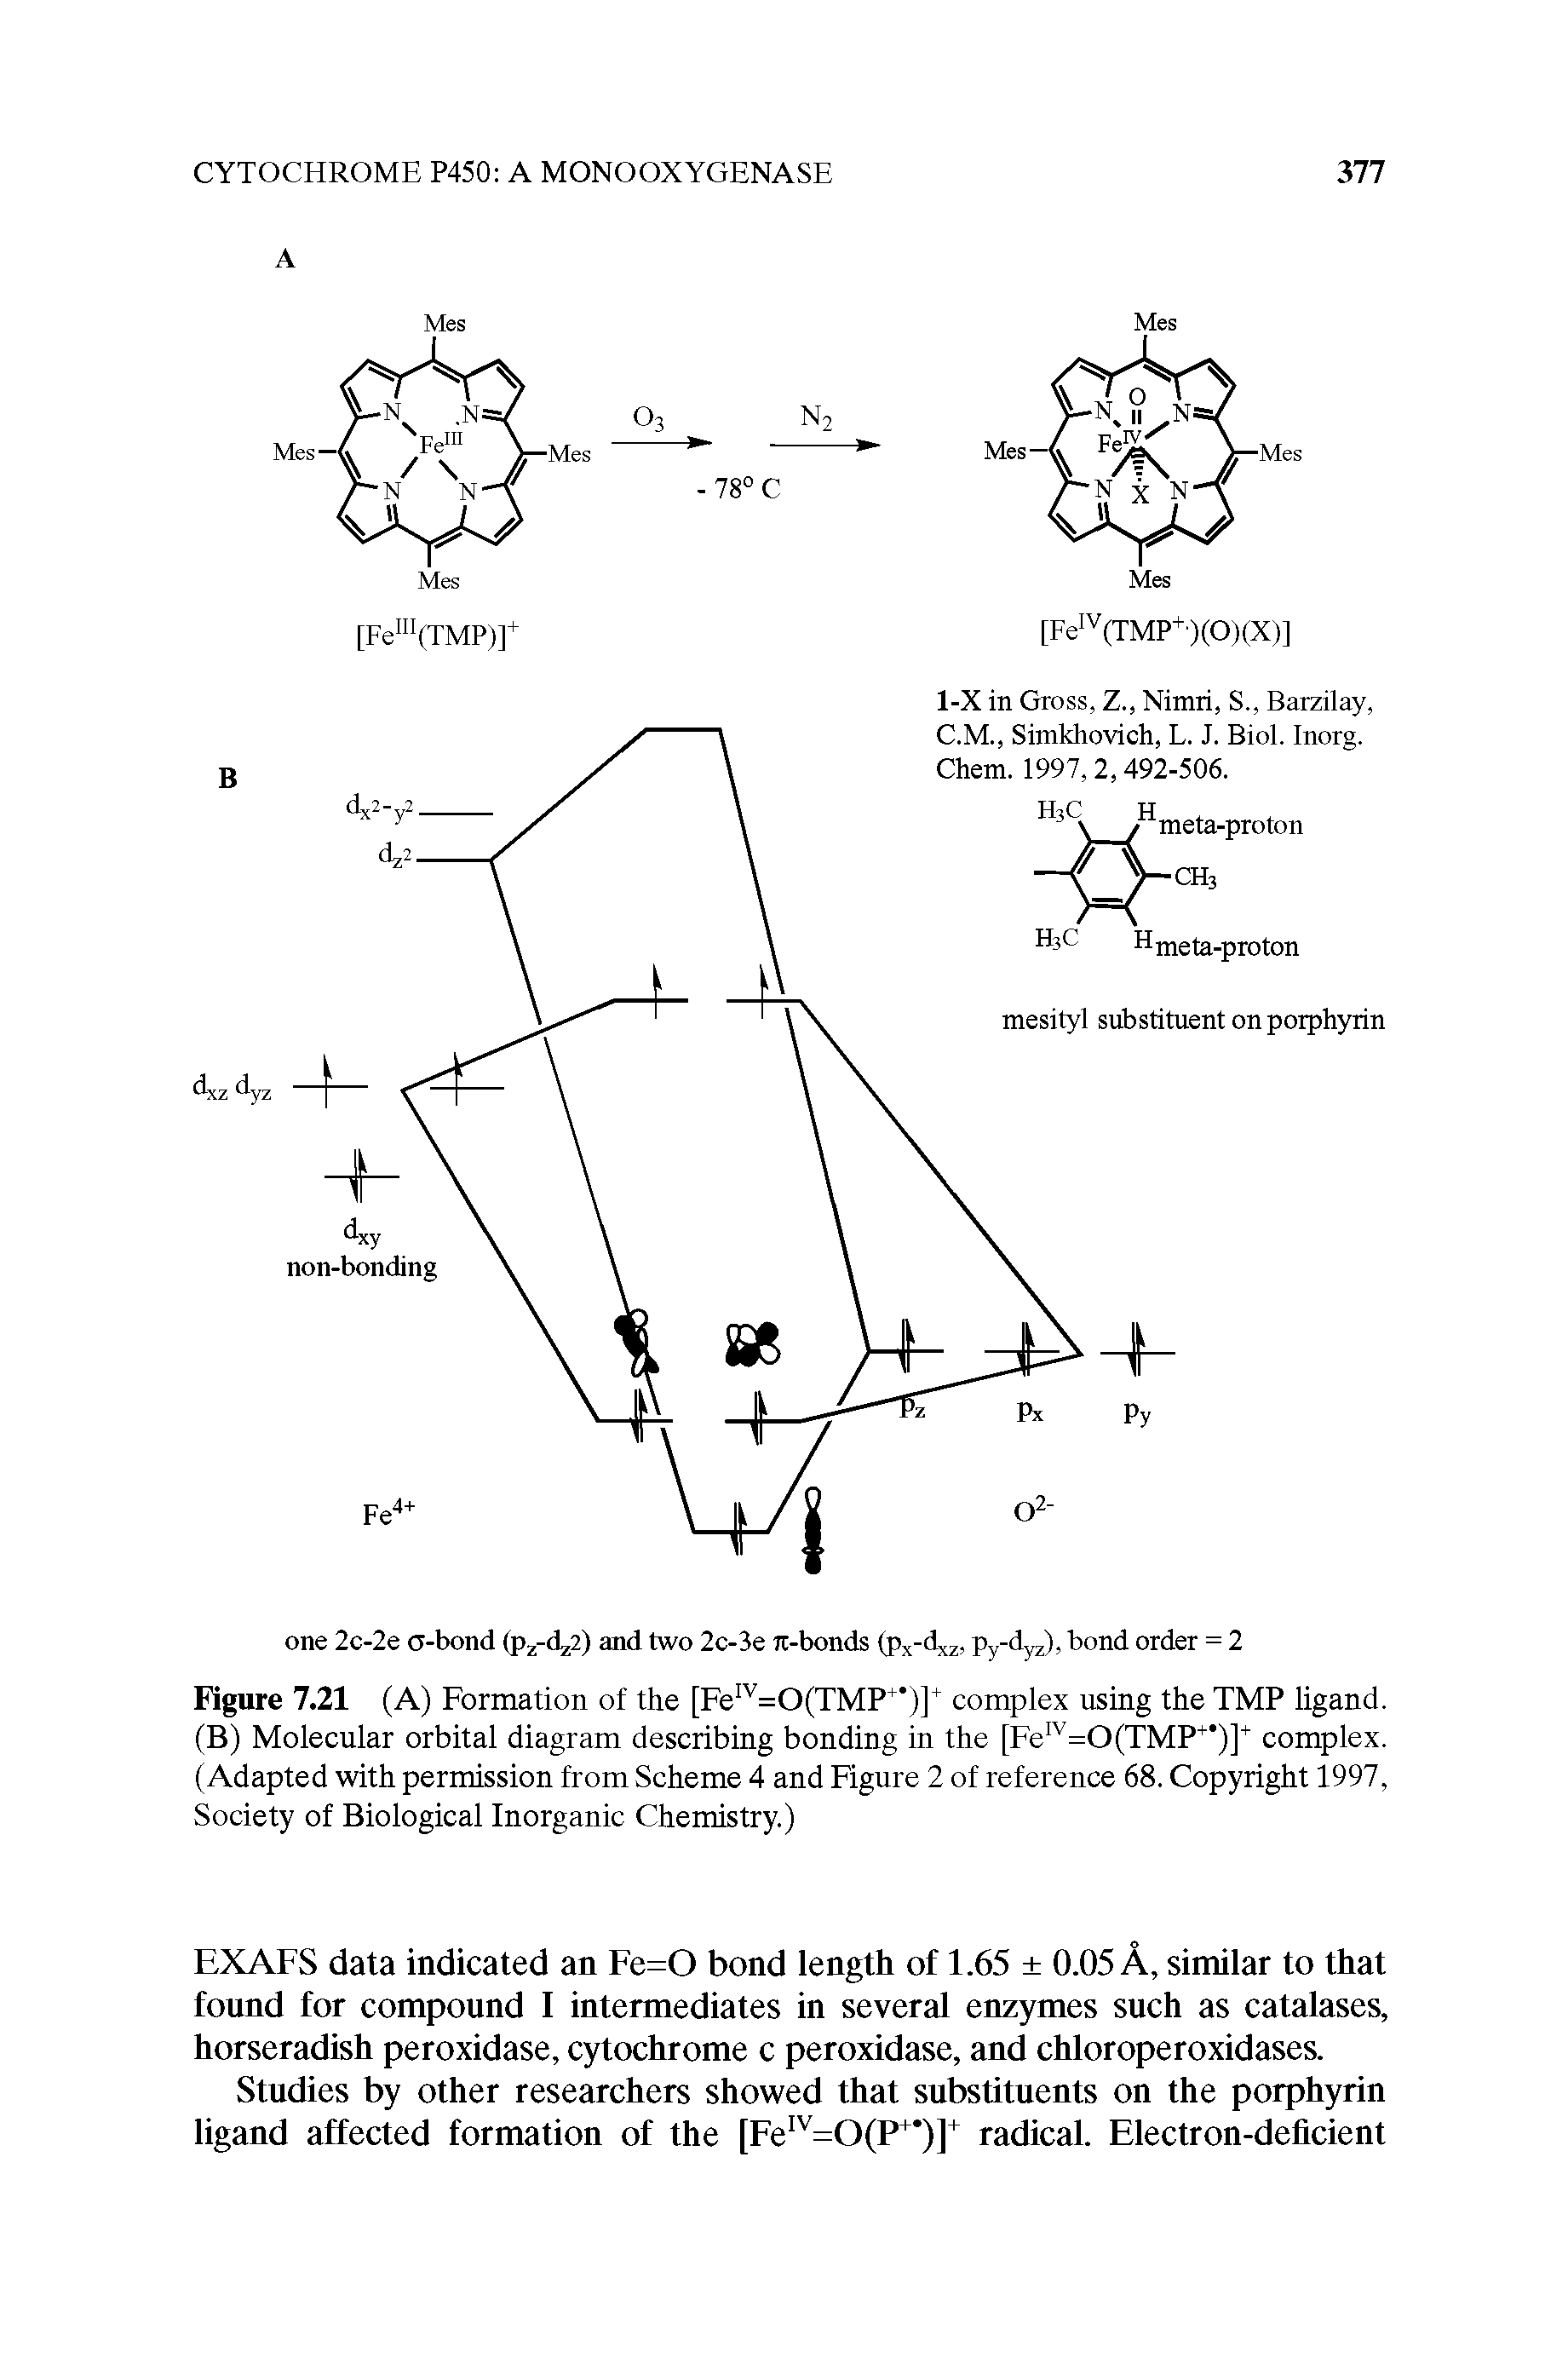 Figure 7.21 (A) Formation of the [Fe" =0(TMP ")] complex using the TMP ligand. (B) Molecular orbital diagram describing bonding in the [Fe" =0(TMP )] complex. (Adapted with permission from Scheme 4 and Figure 2 of reference 68. Copyright 1997, Society of Biological Inorganic Chemistry.)...